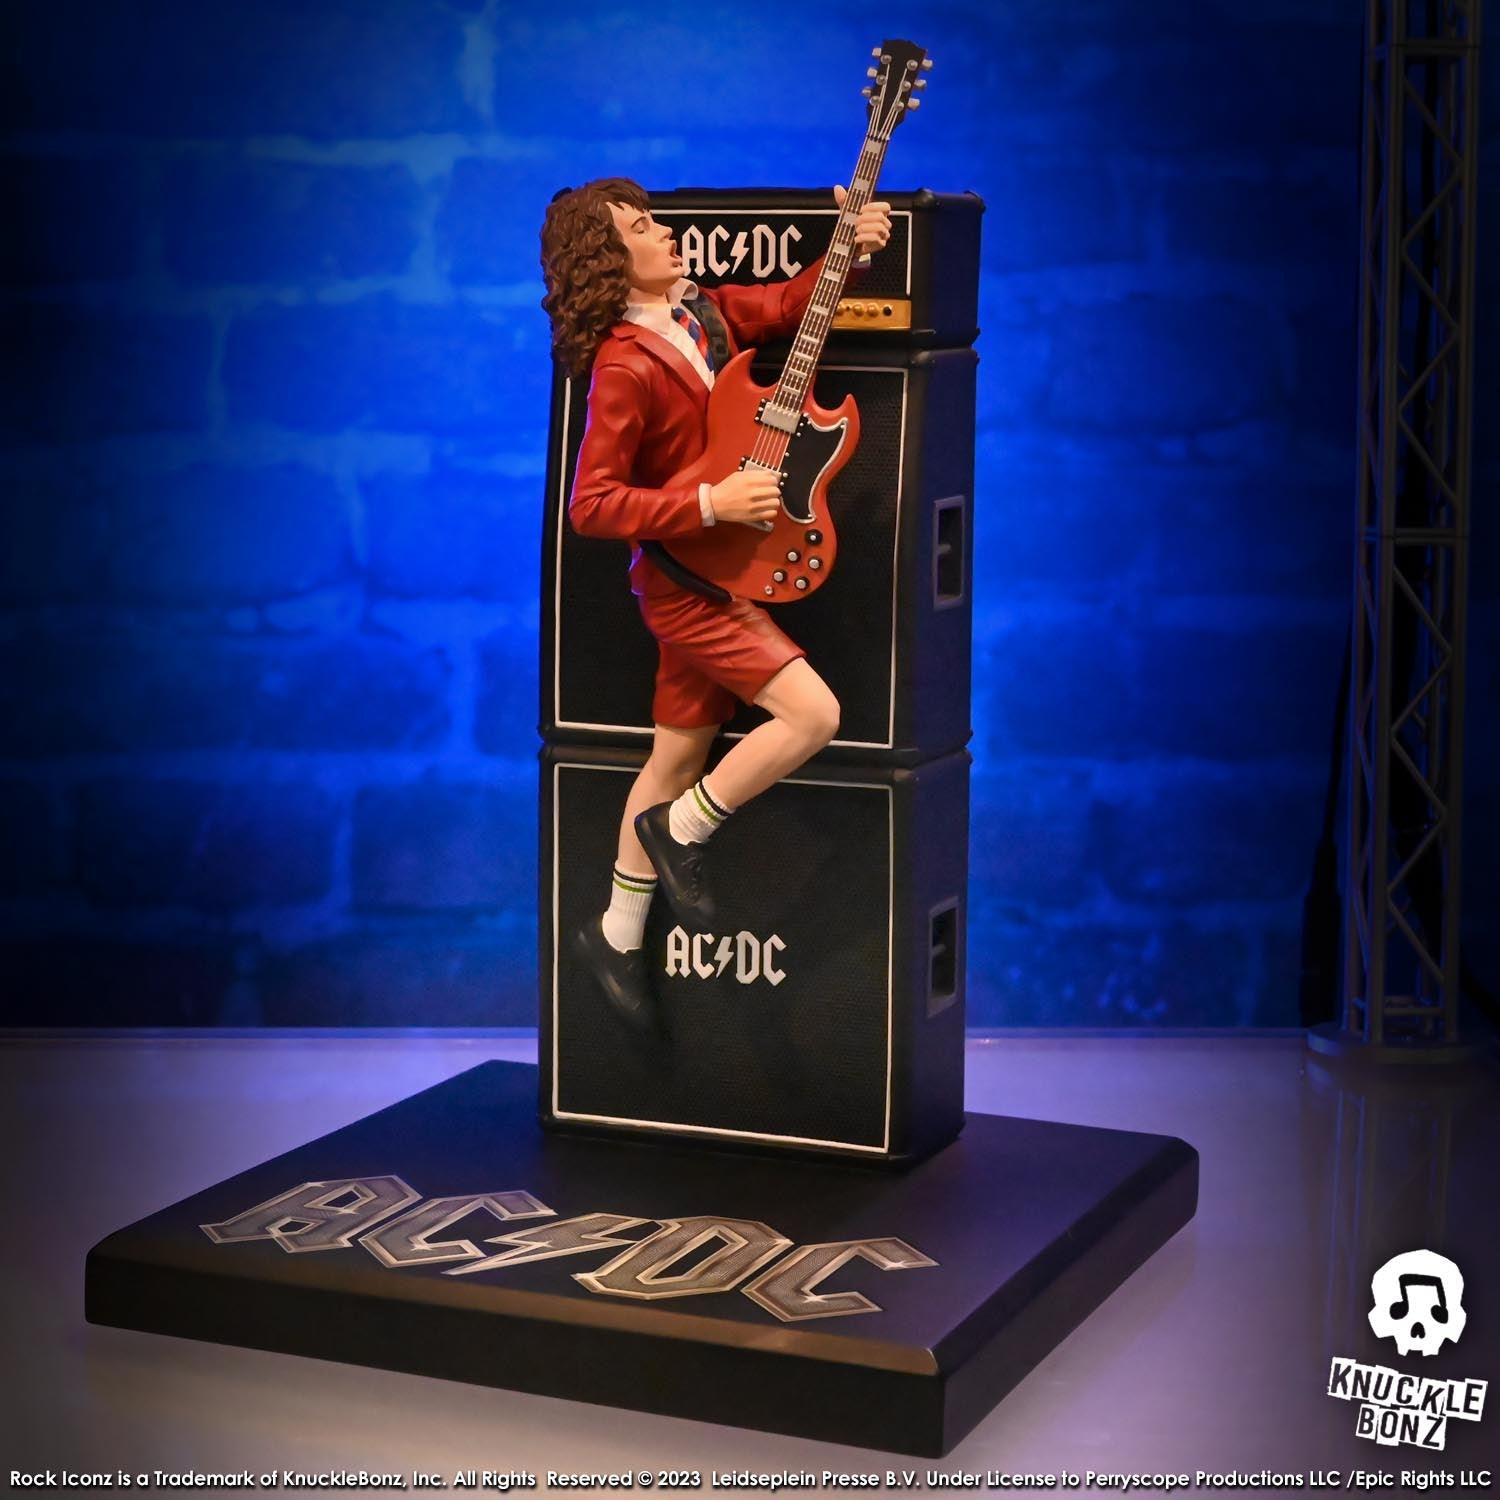 KNUACDC200 AC/DC - Angus & Malcolm Young Rock Iconz 1:9 Scale Statue (Set of 2) - KnuckleBonz - Titan Pop Culture